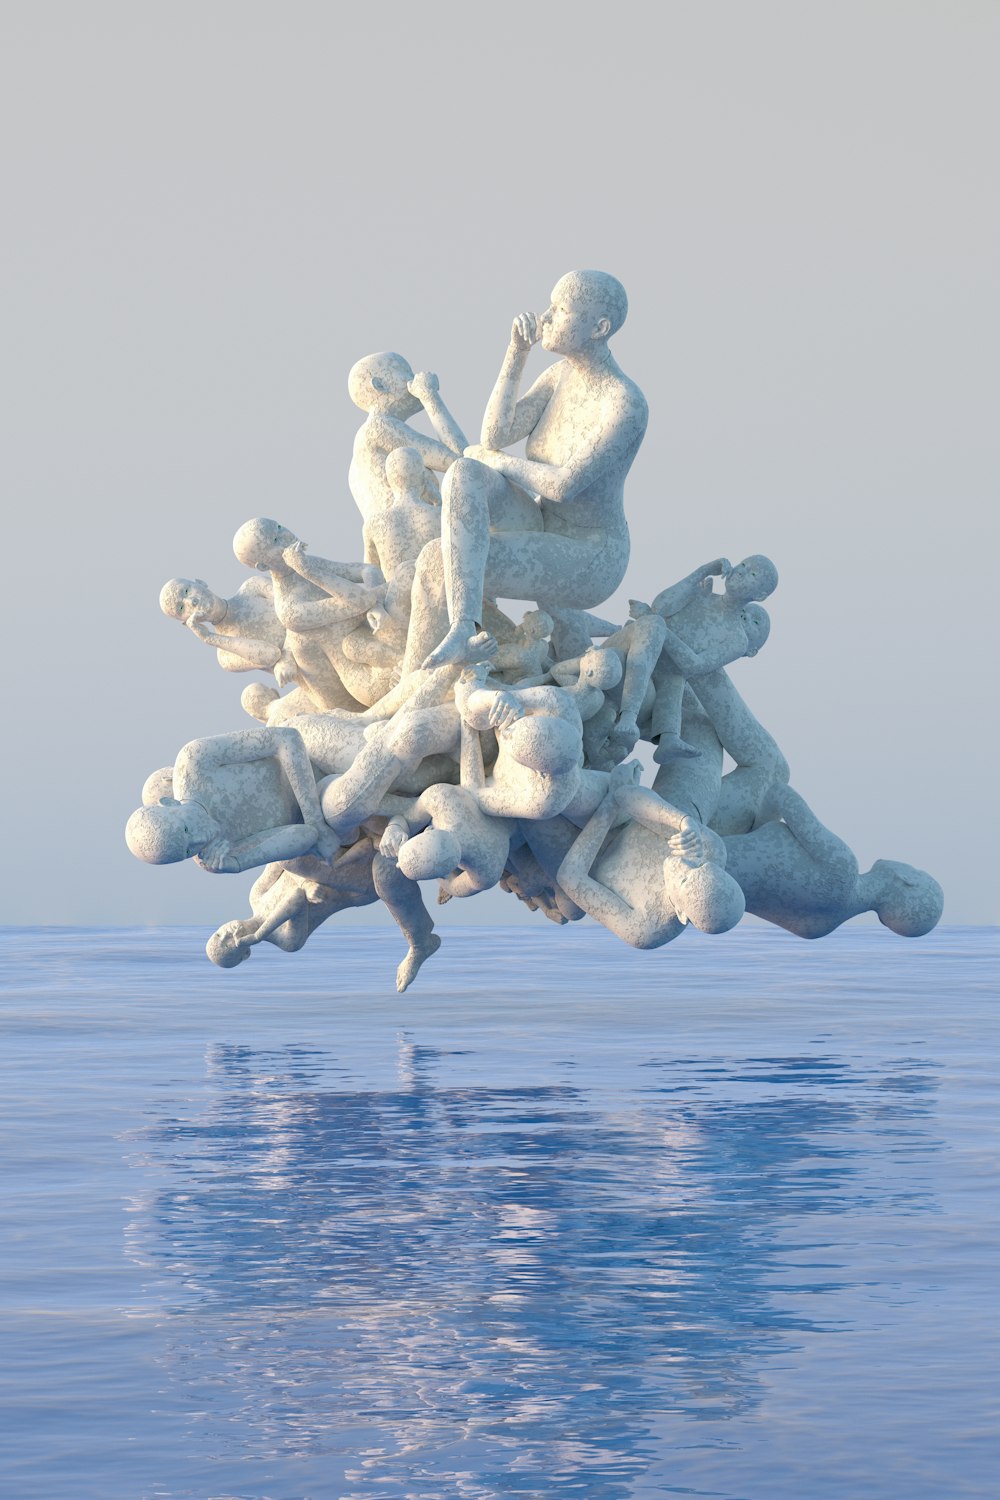 a group of white sculptures sitting on top of a body of water